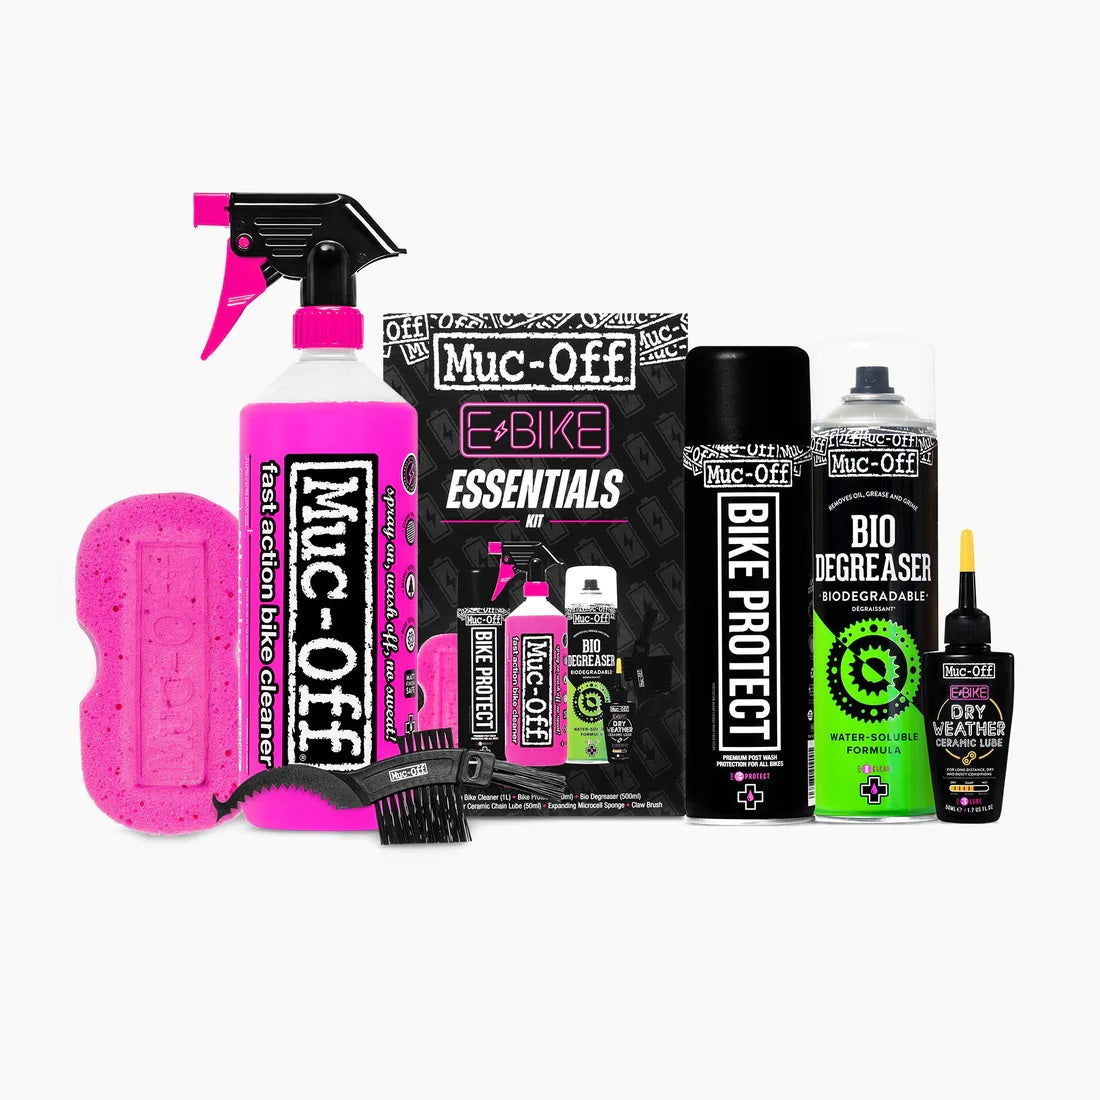 Muc-Off Ebike Essential Cleaning Kit